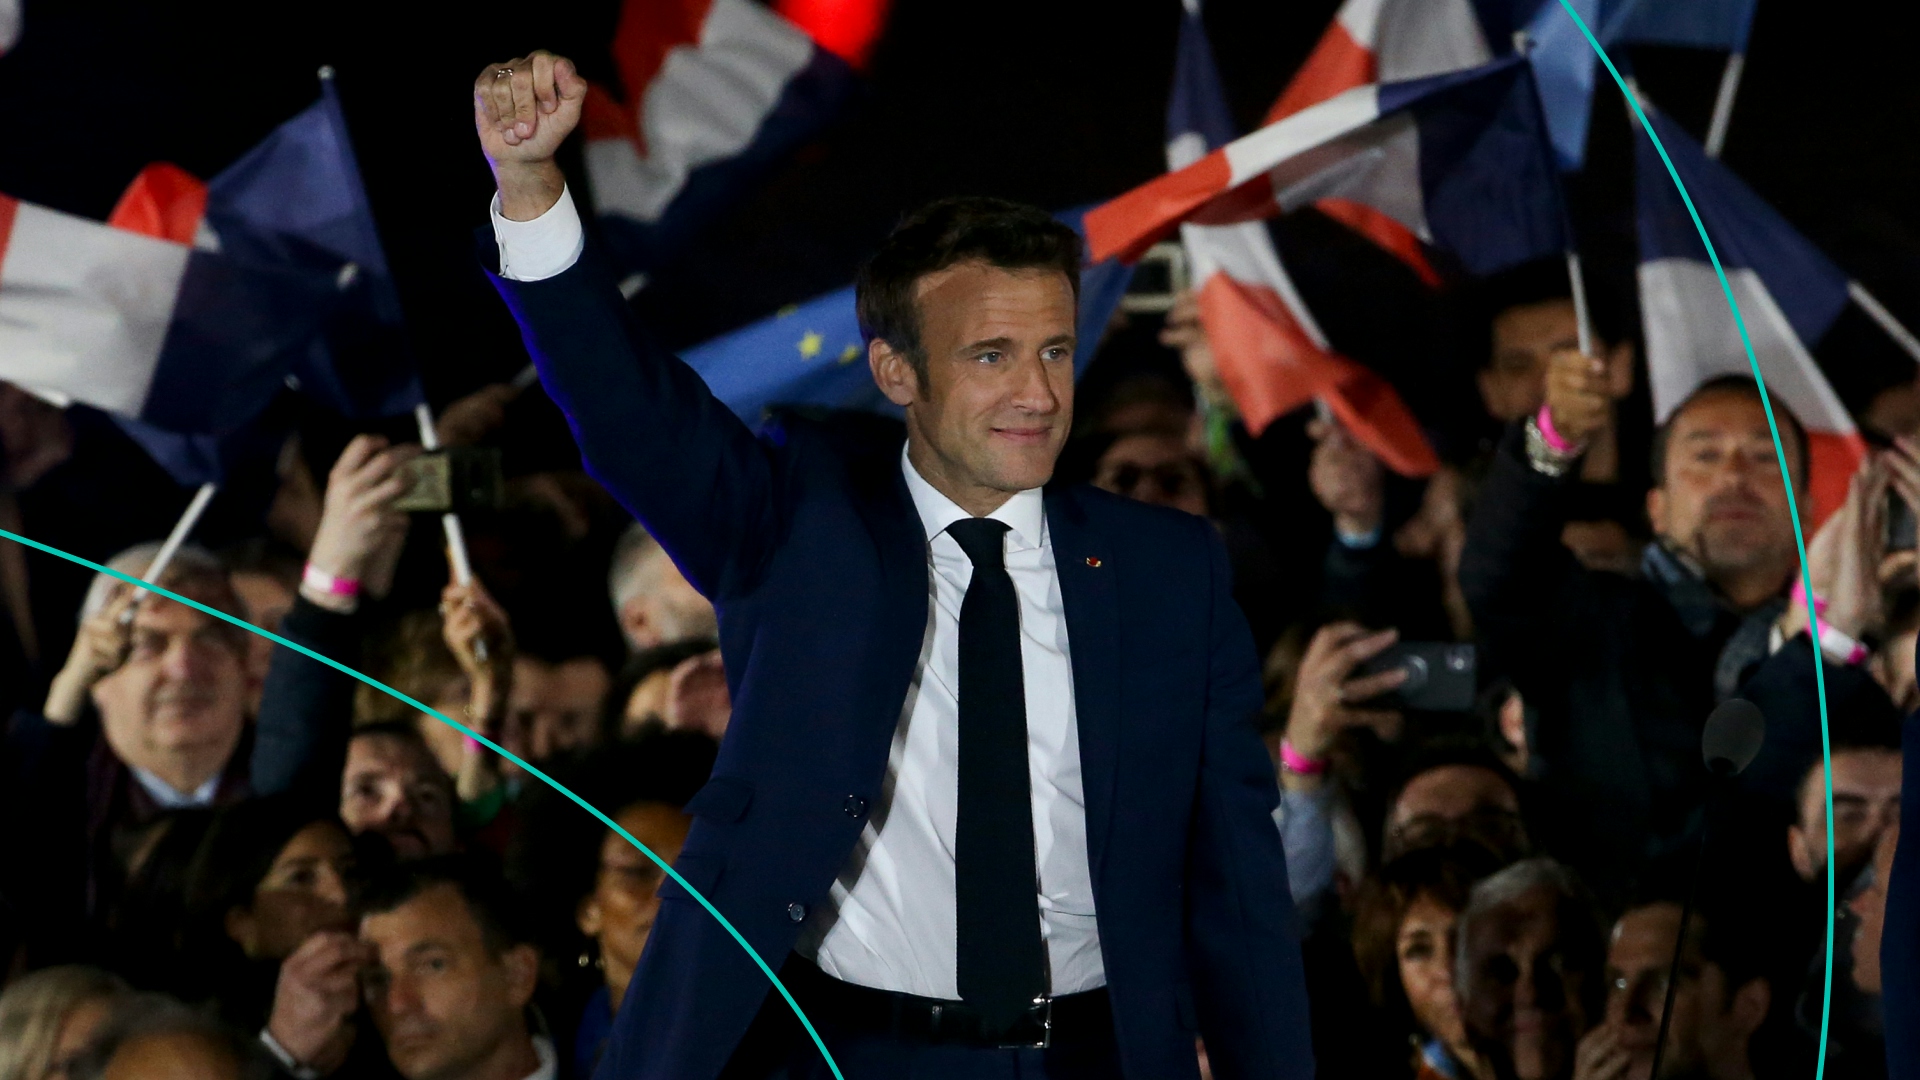 French President Emmanuel Macron celebrates his re-election at the Champ de Mars near the Eiffel Tower